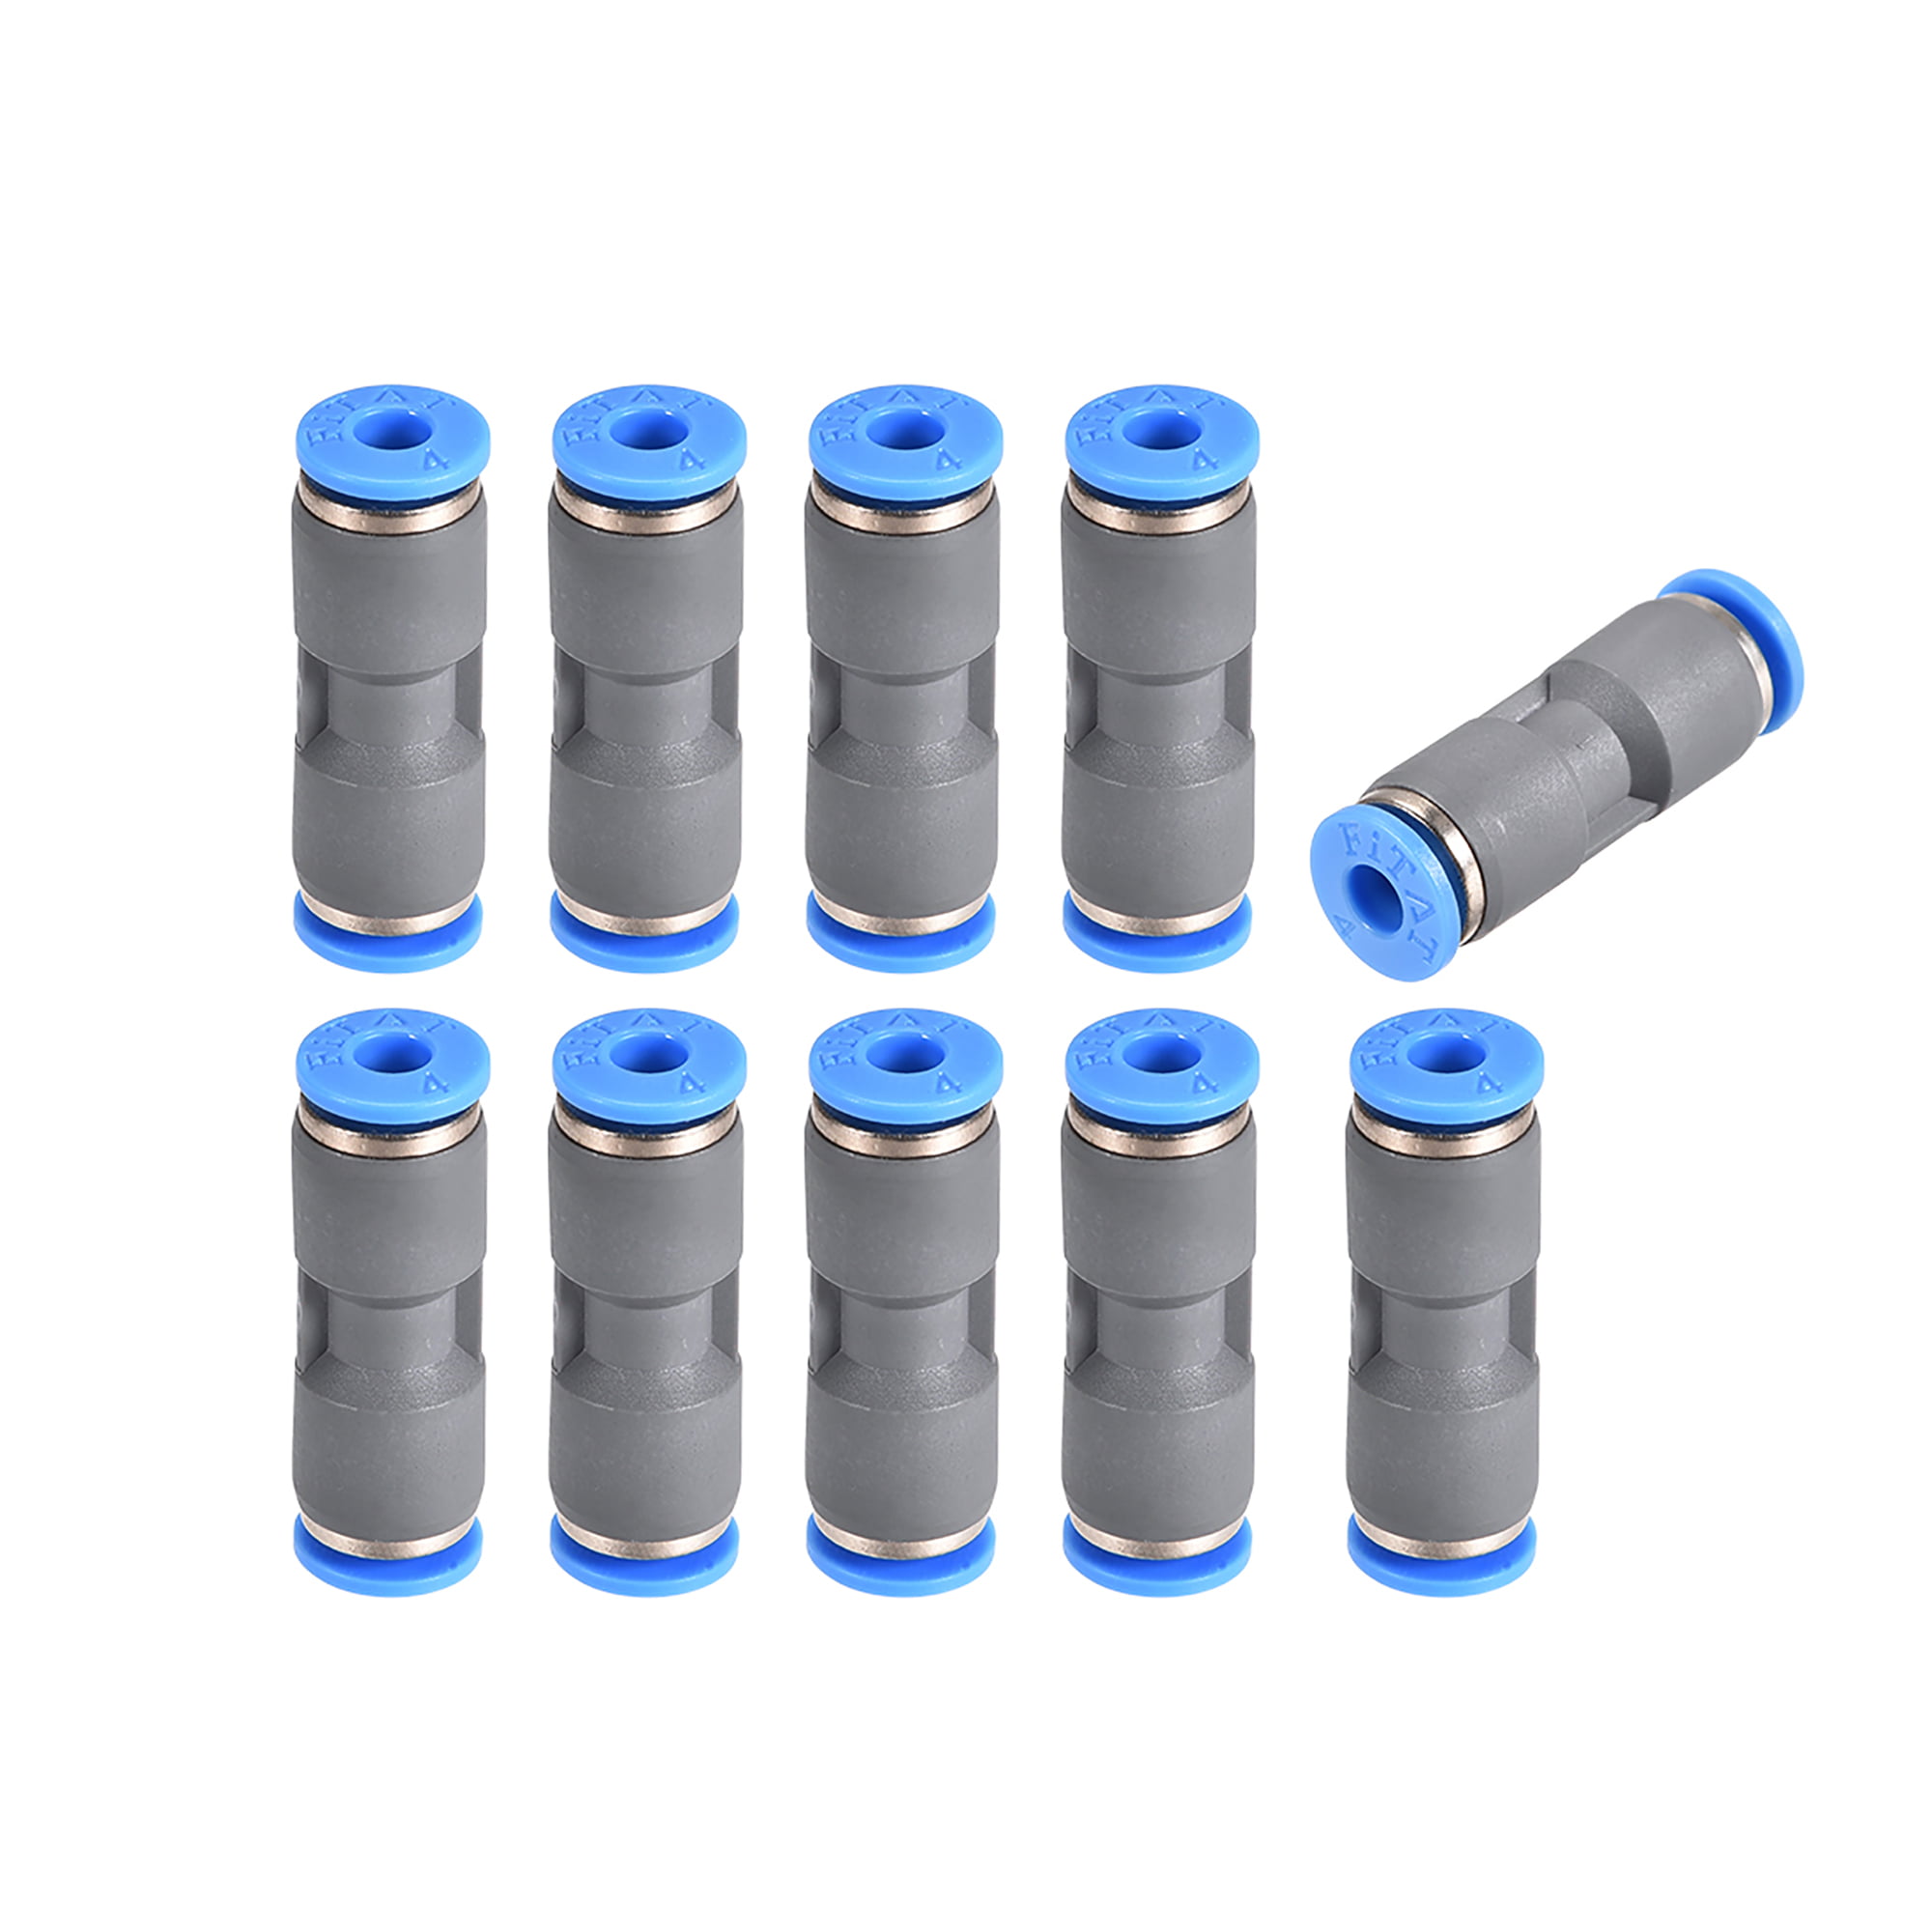 10Pcs Straight Push in Air Pneumatic Tube Fitting Coupler Union Connector 